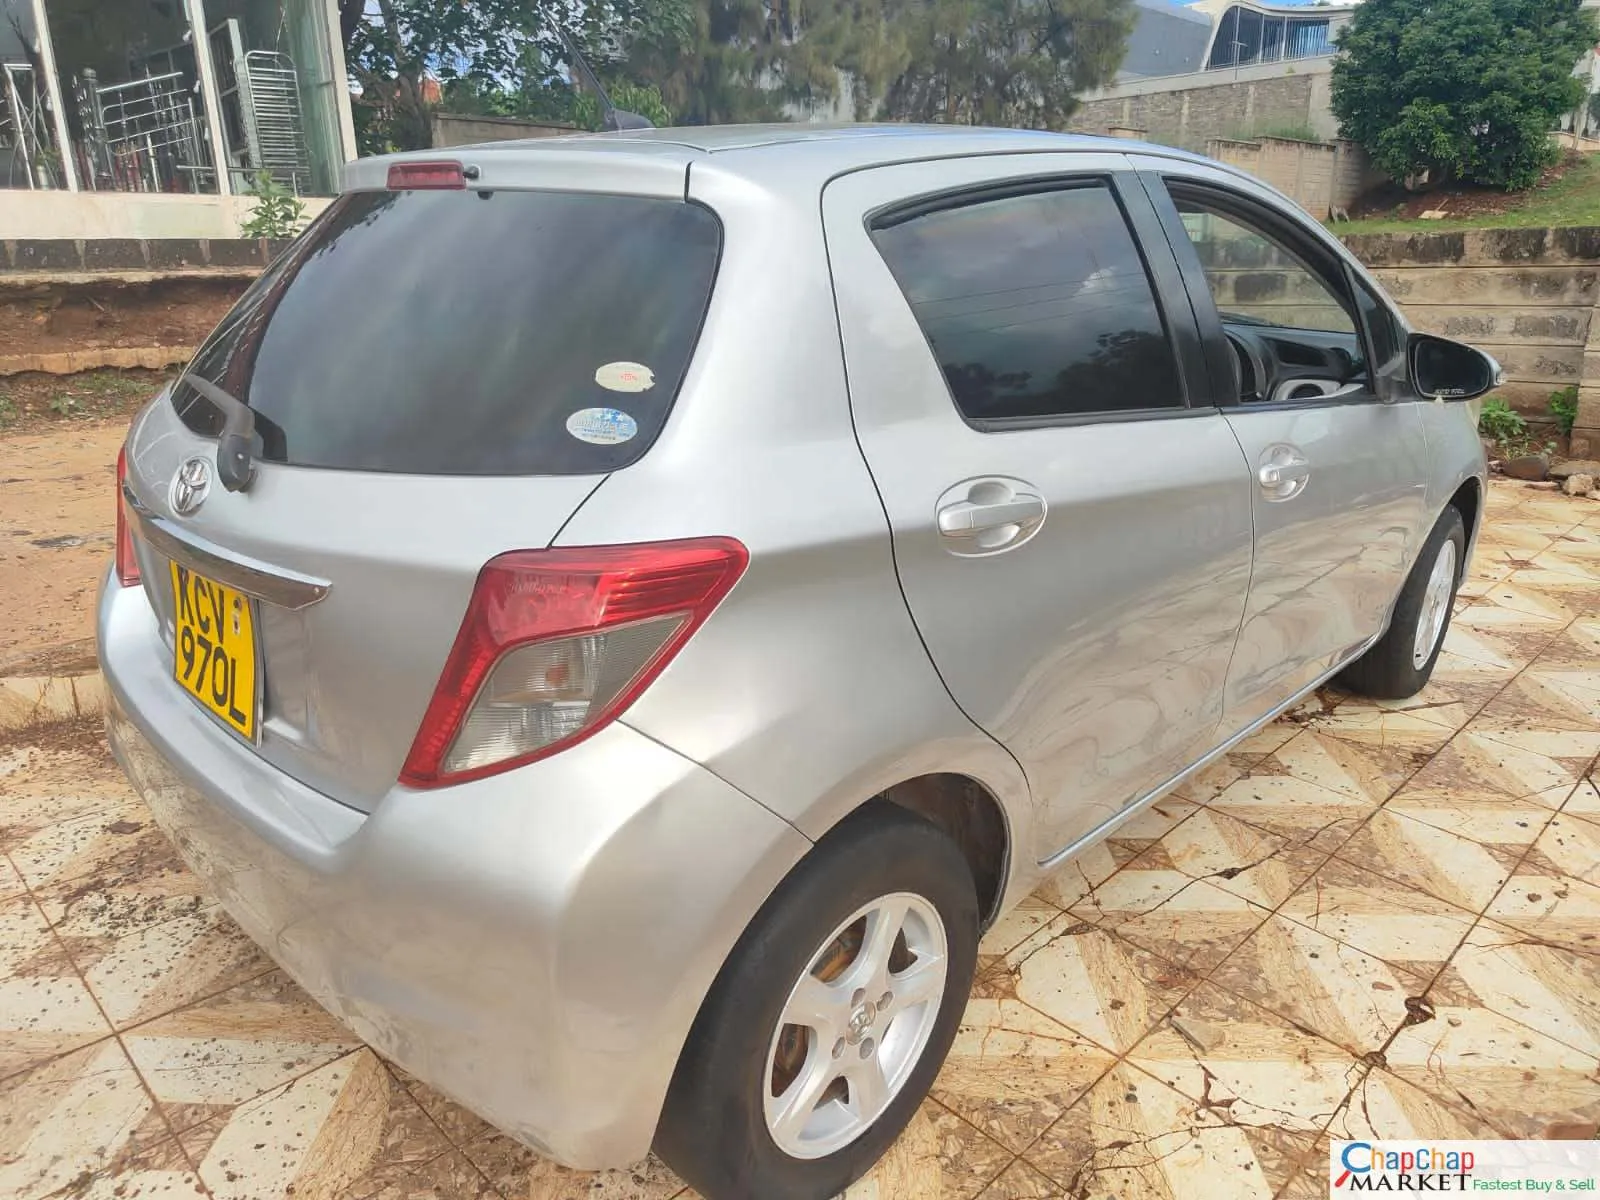 Toyota Vitz NEW SHAPE 1300cc You PAY 30% Deposit INSTALLMENTS Trade in Ok New Hire purchase installments